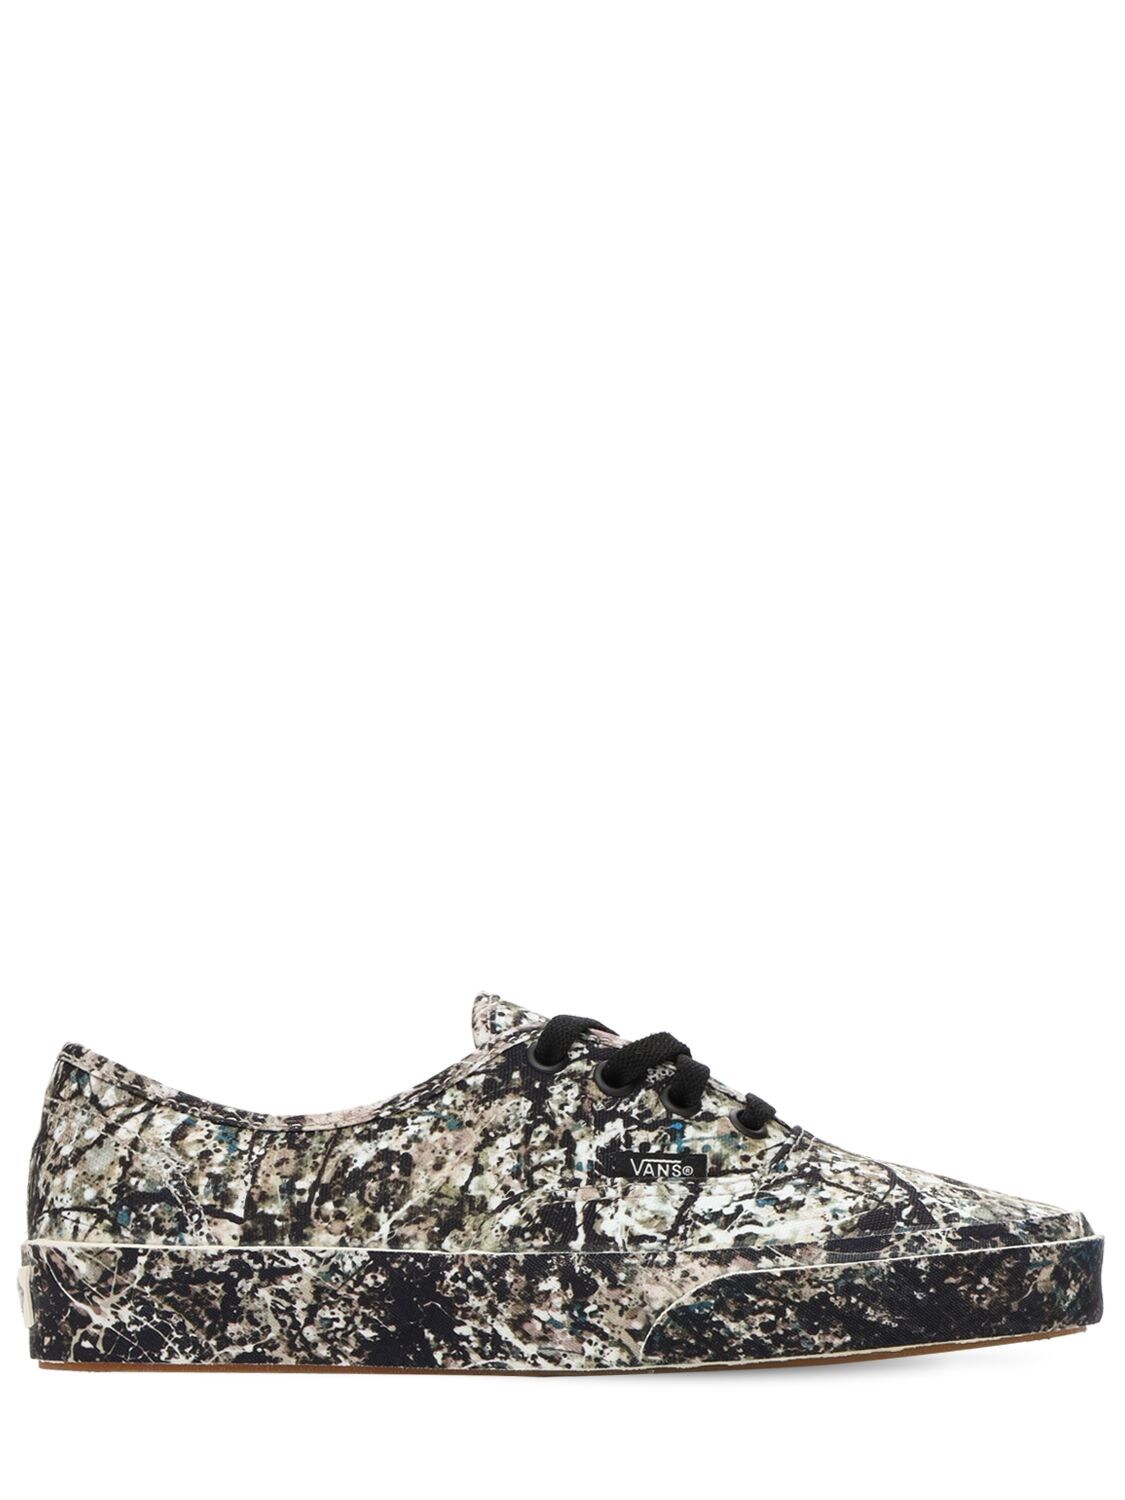 Image of Jackson Pollock Authentic Sneakers